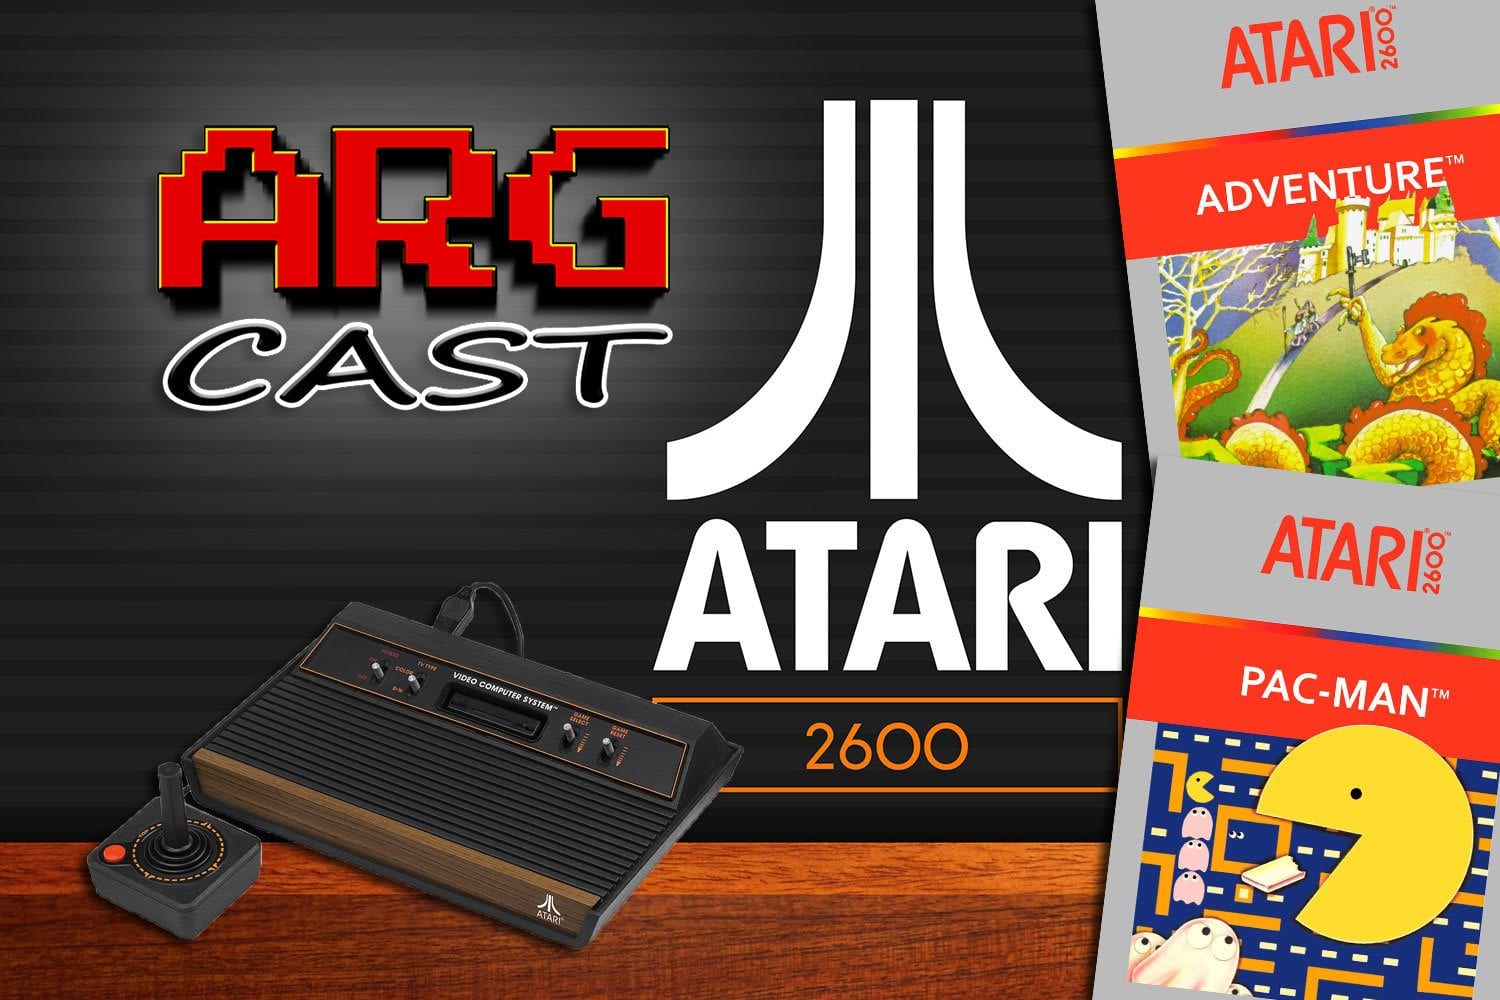 ARGcast #78: Playing Atari 2600 Today with Andre Tipton